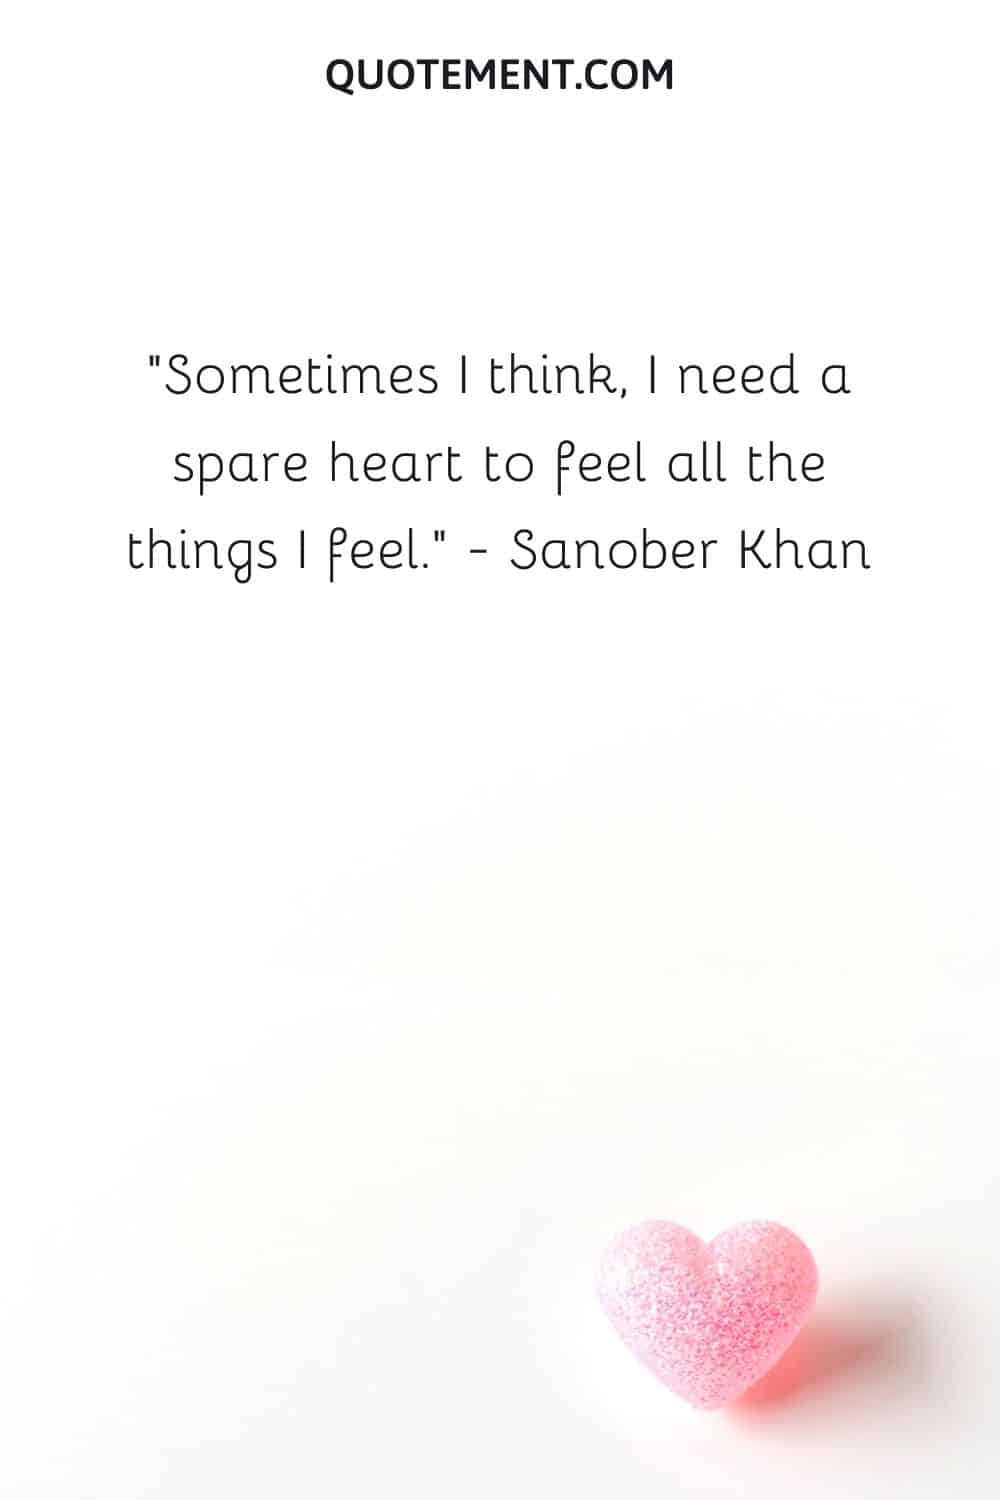 Sometimes I think, I need a spare heart to feel all the things I feel.